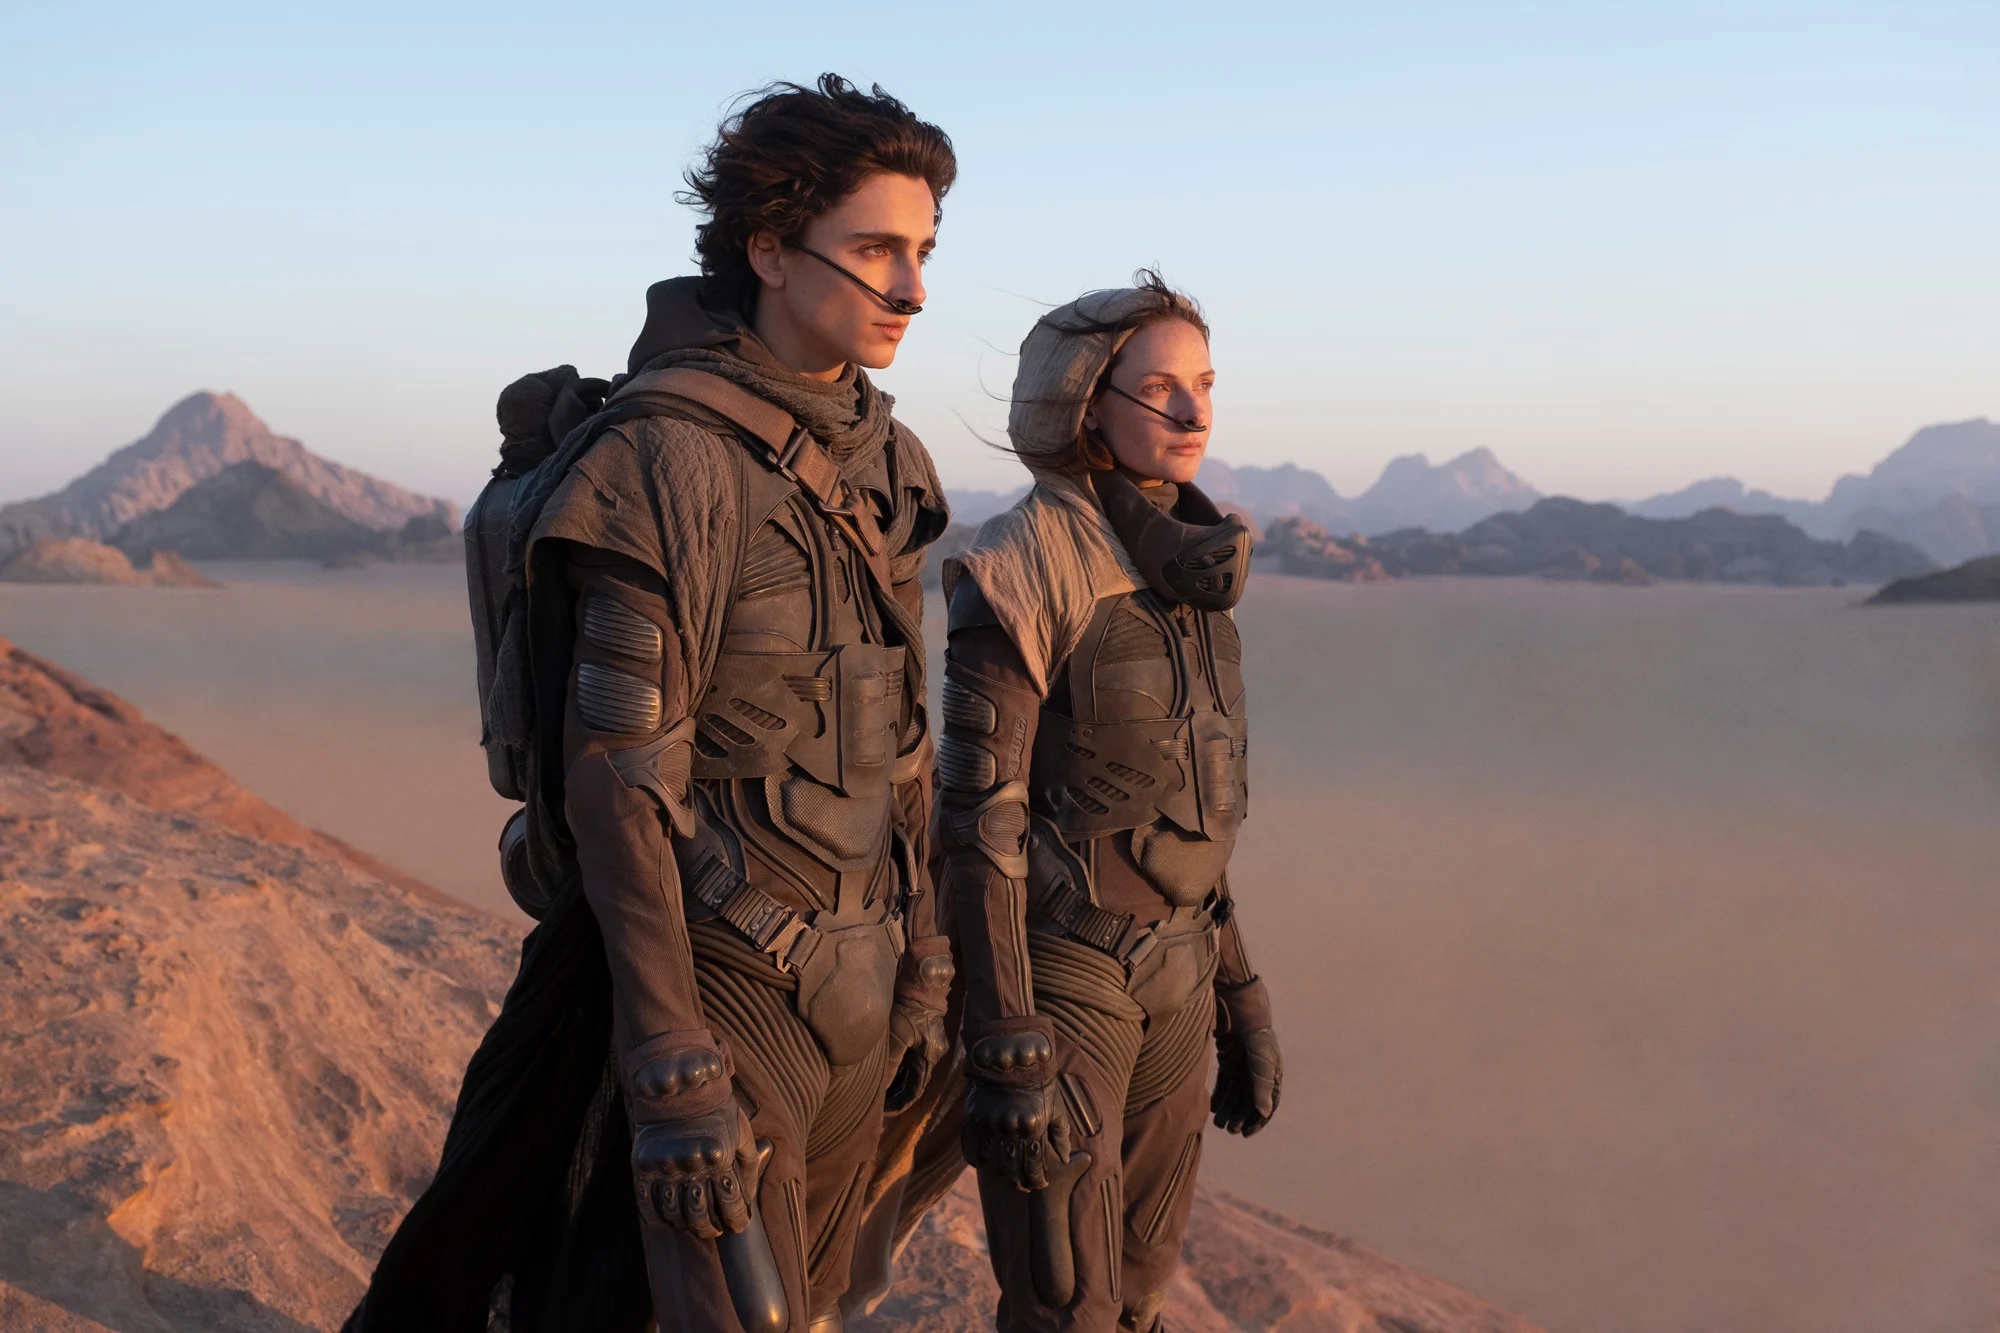 TIMOTHÉE CHALAMET as Paul Atreides and REBECCA FERGUSON as Lady Jessica in Warner Bros. Pictures’ and Legendary Pictures’ action adventure “DUNE,” a Warner Bros. Pictures release. Photo by Chiabella James